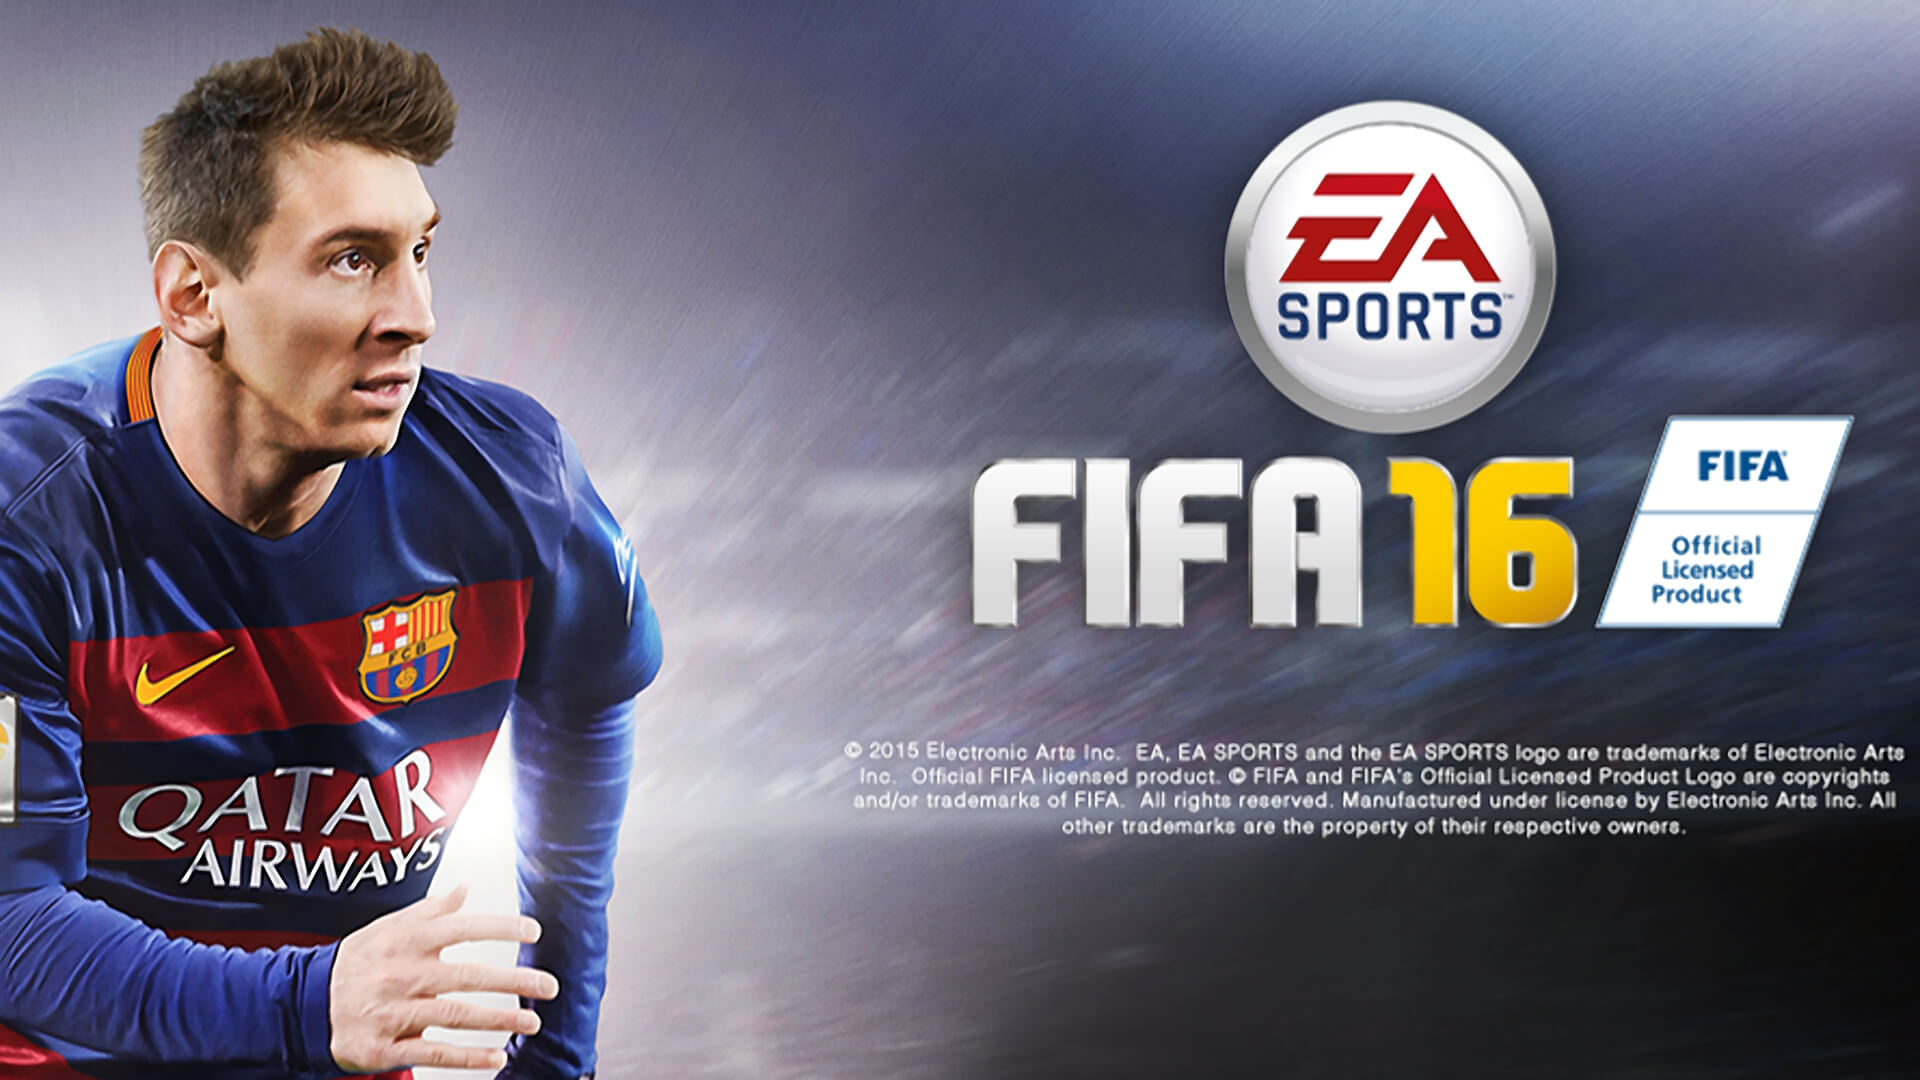 FIFA 16 Leo Messi 2016 Official Cover Poster Wallpaper 1920x1080